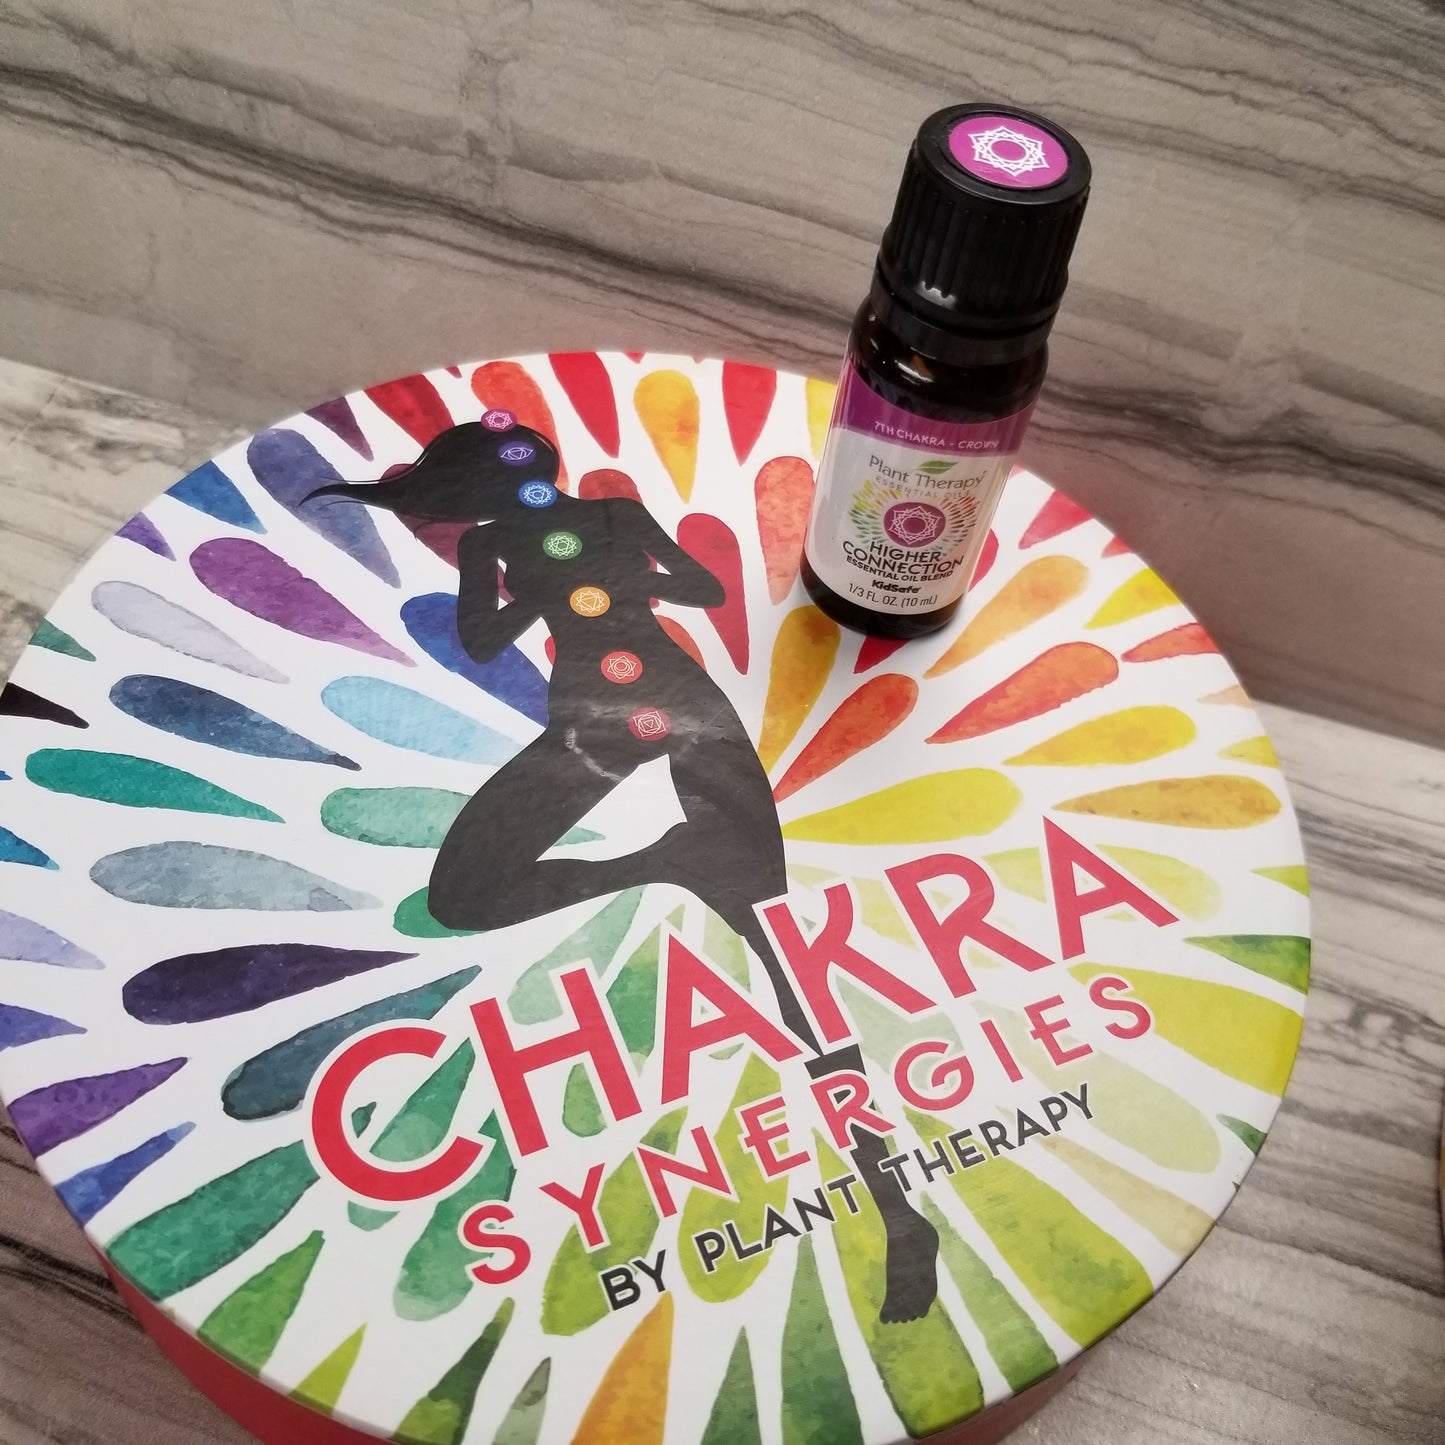 Chakra essential oils and more!